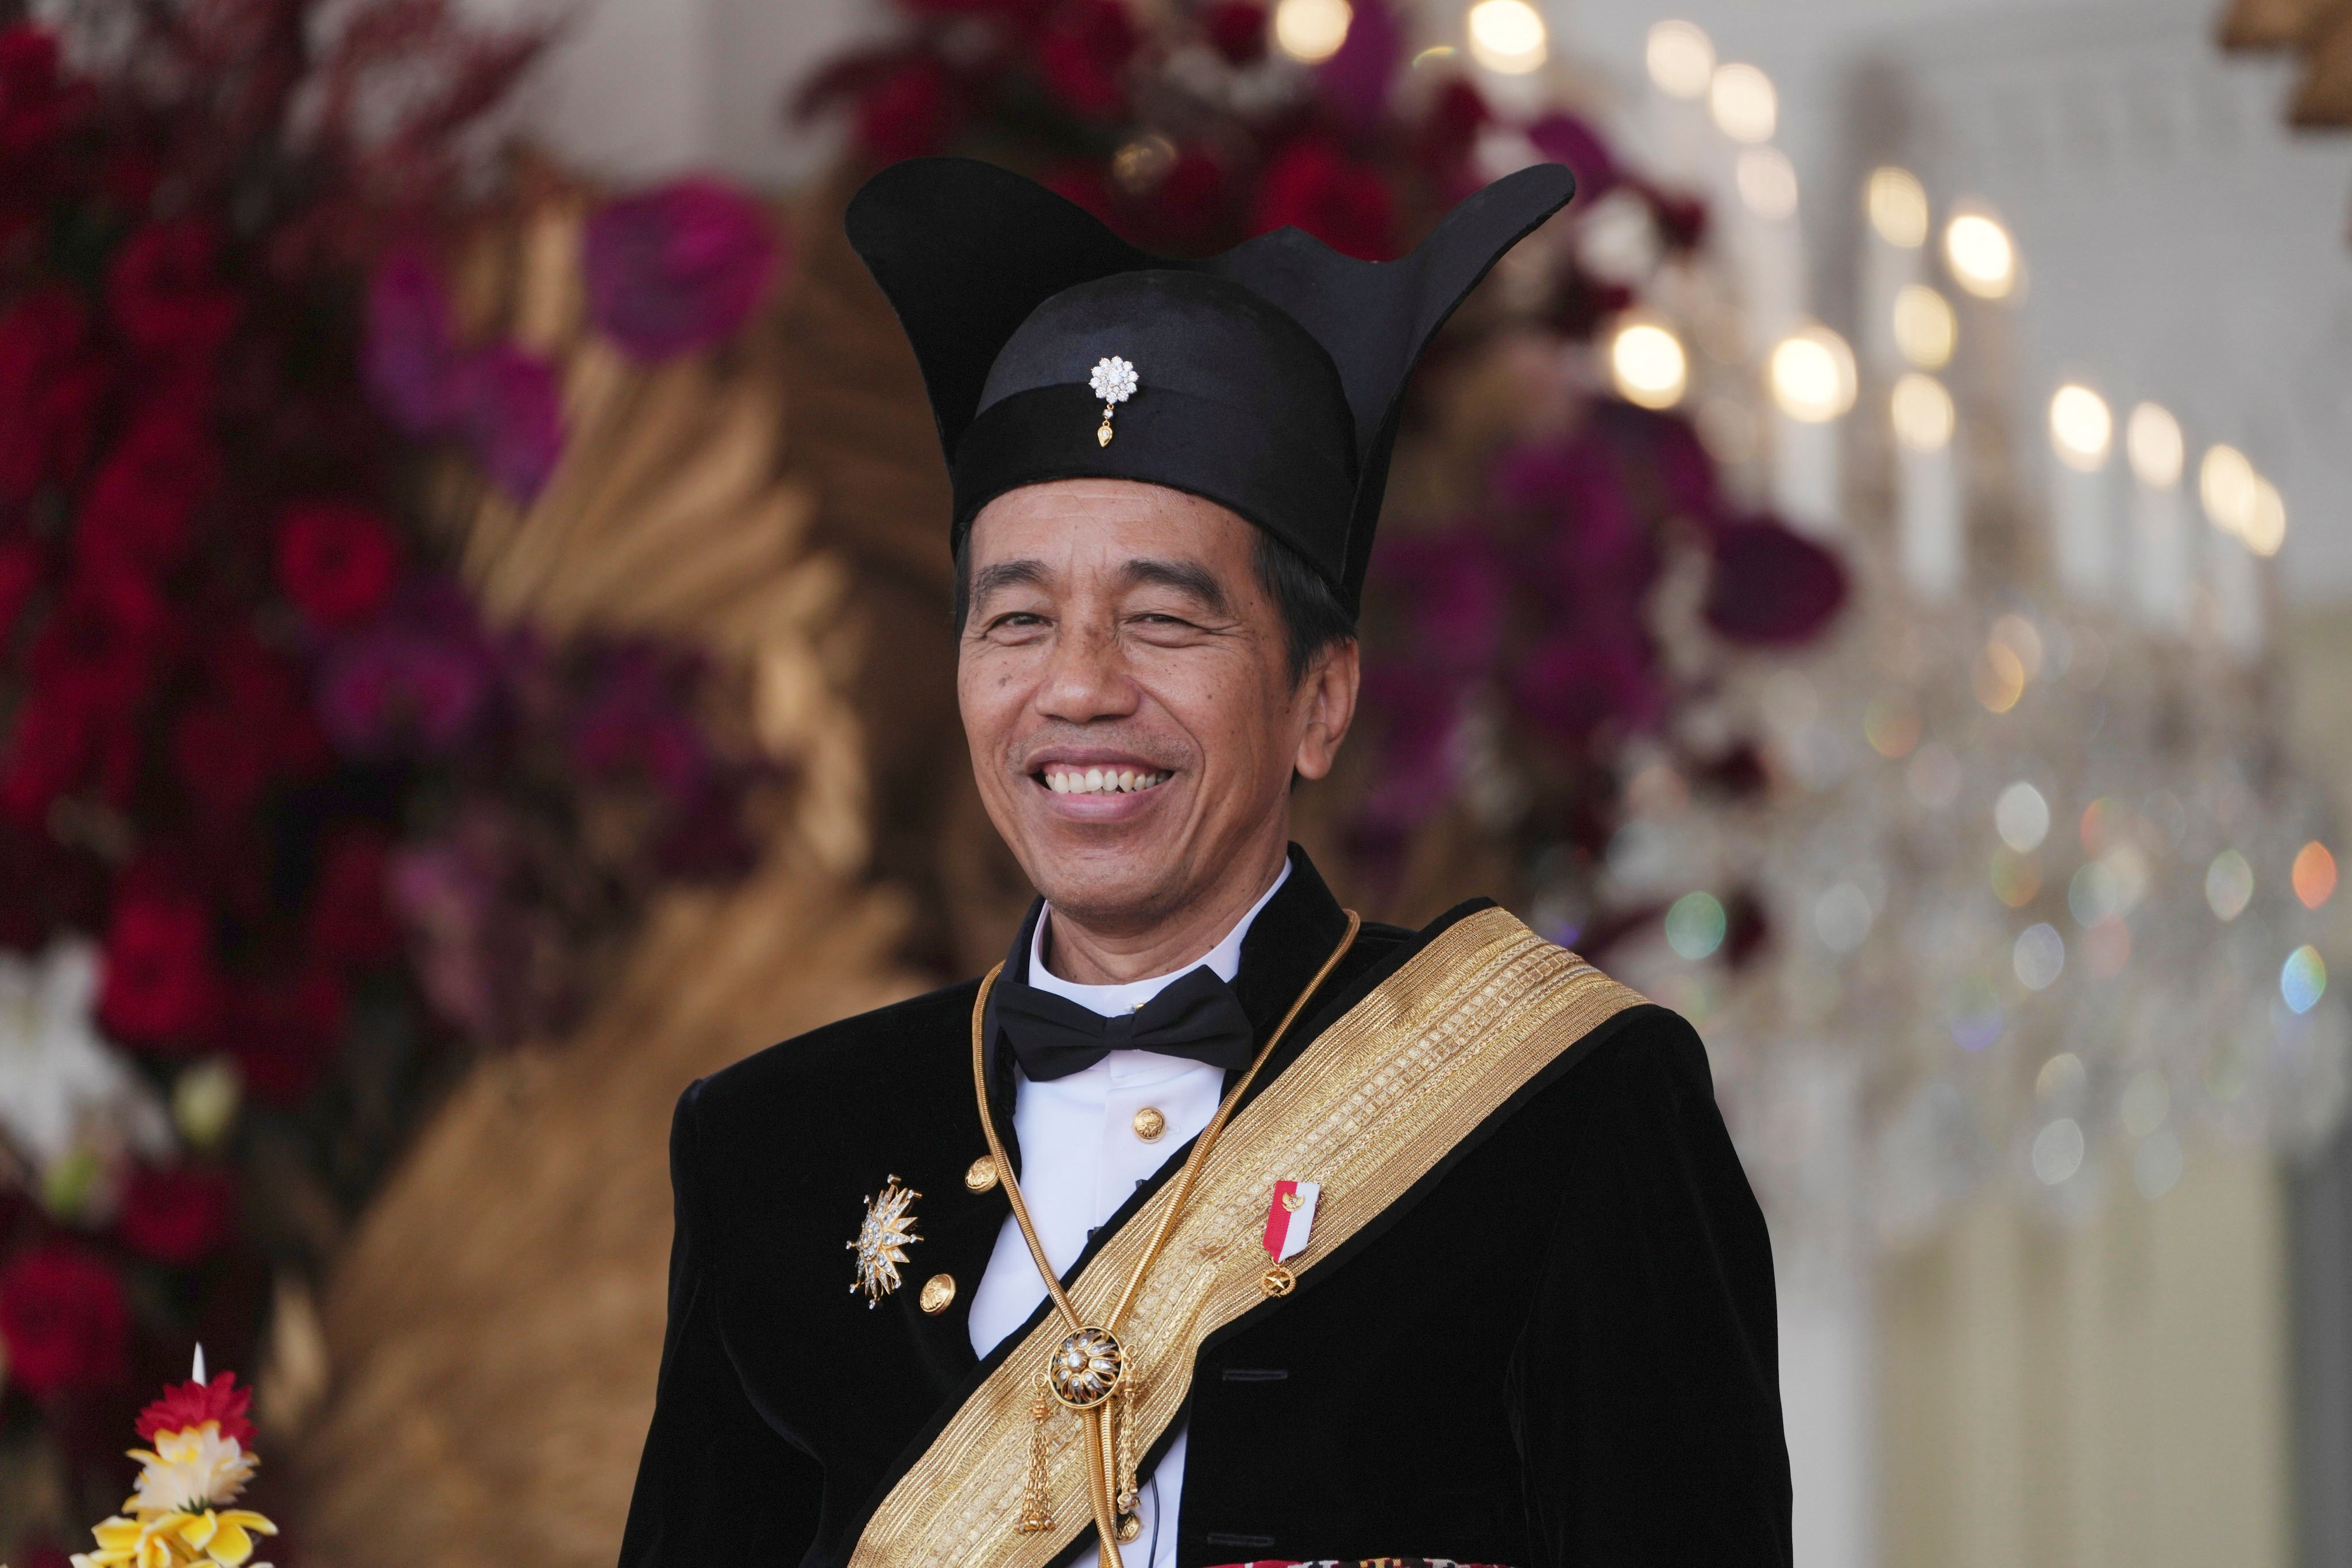 Indonesian President Joko Widodo celebrates the country’s 78th anniversary of independence at Merdeka Palace in Jakarta on August 17. Photo: AP